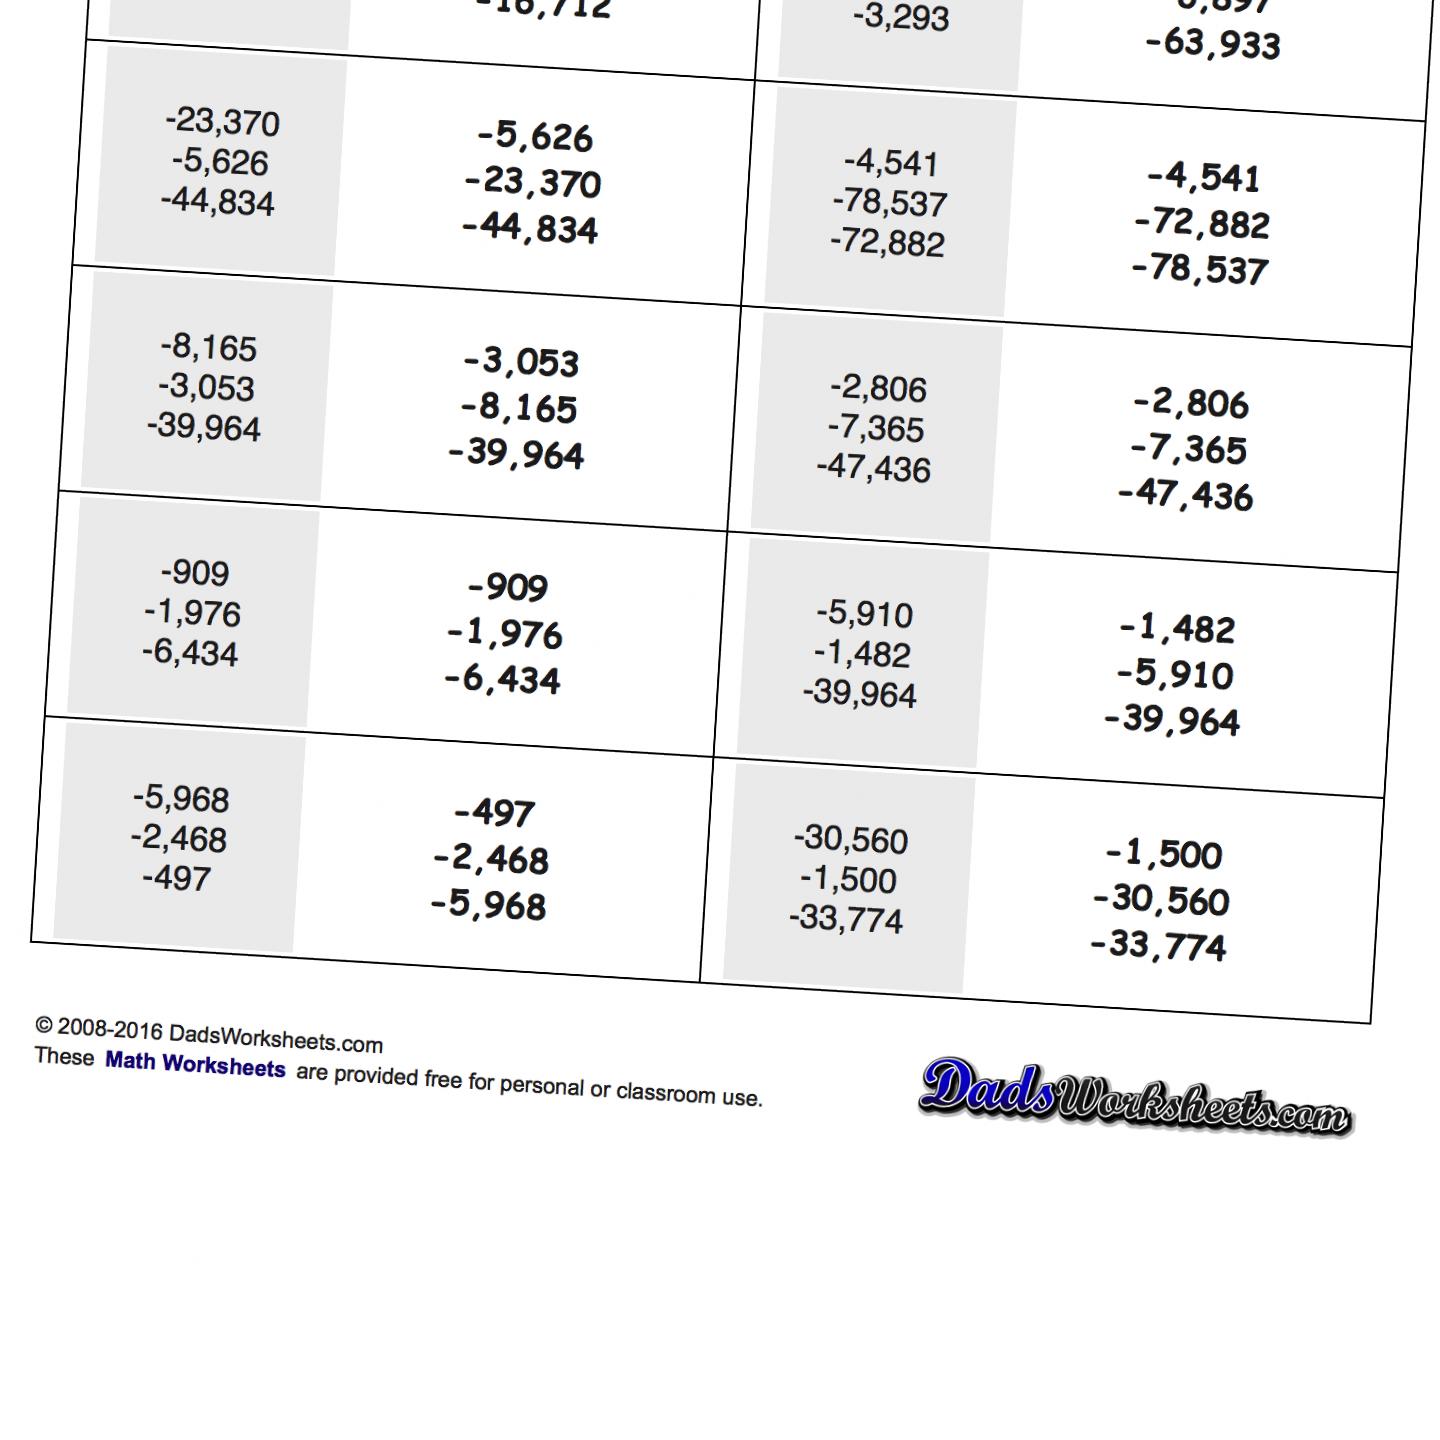 math-worksheets-mixed-place-value-ordering-negative-numbers